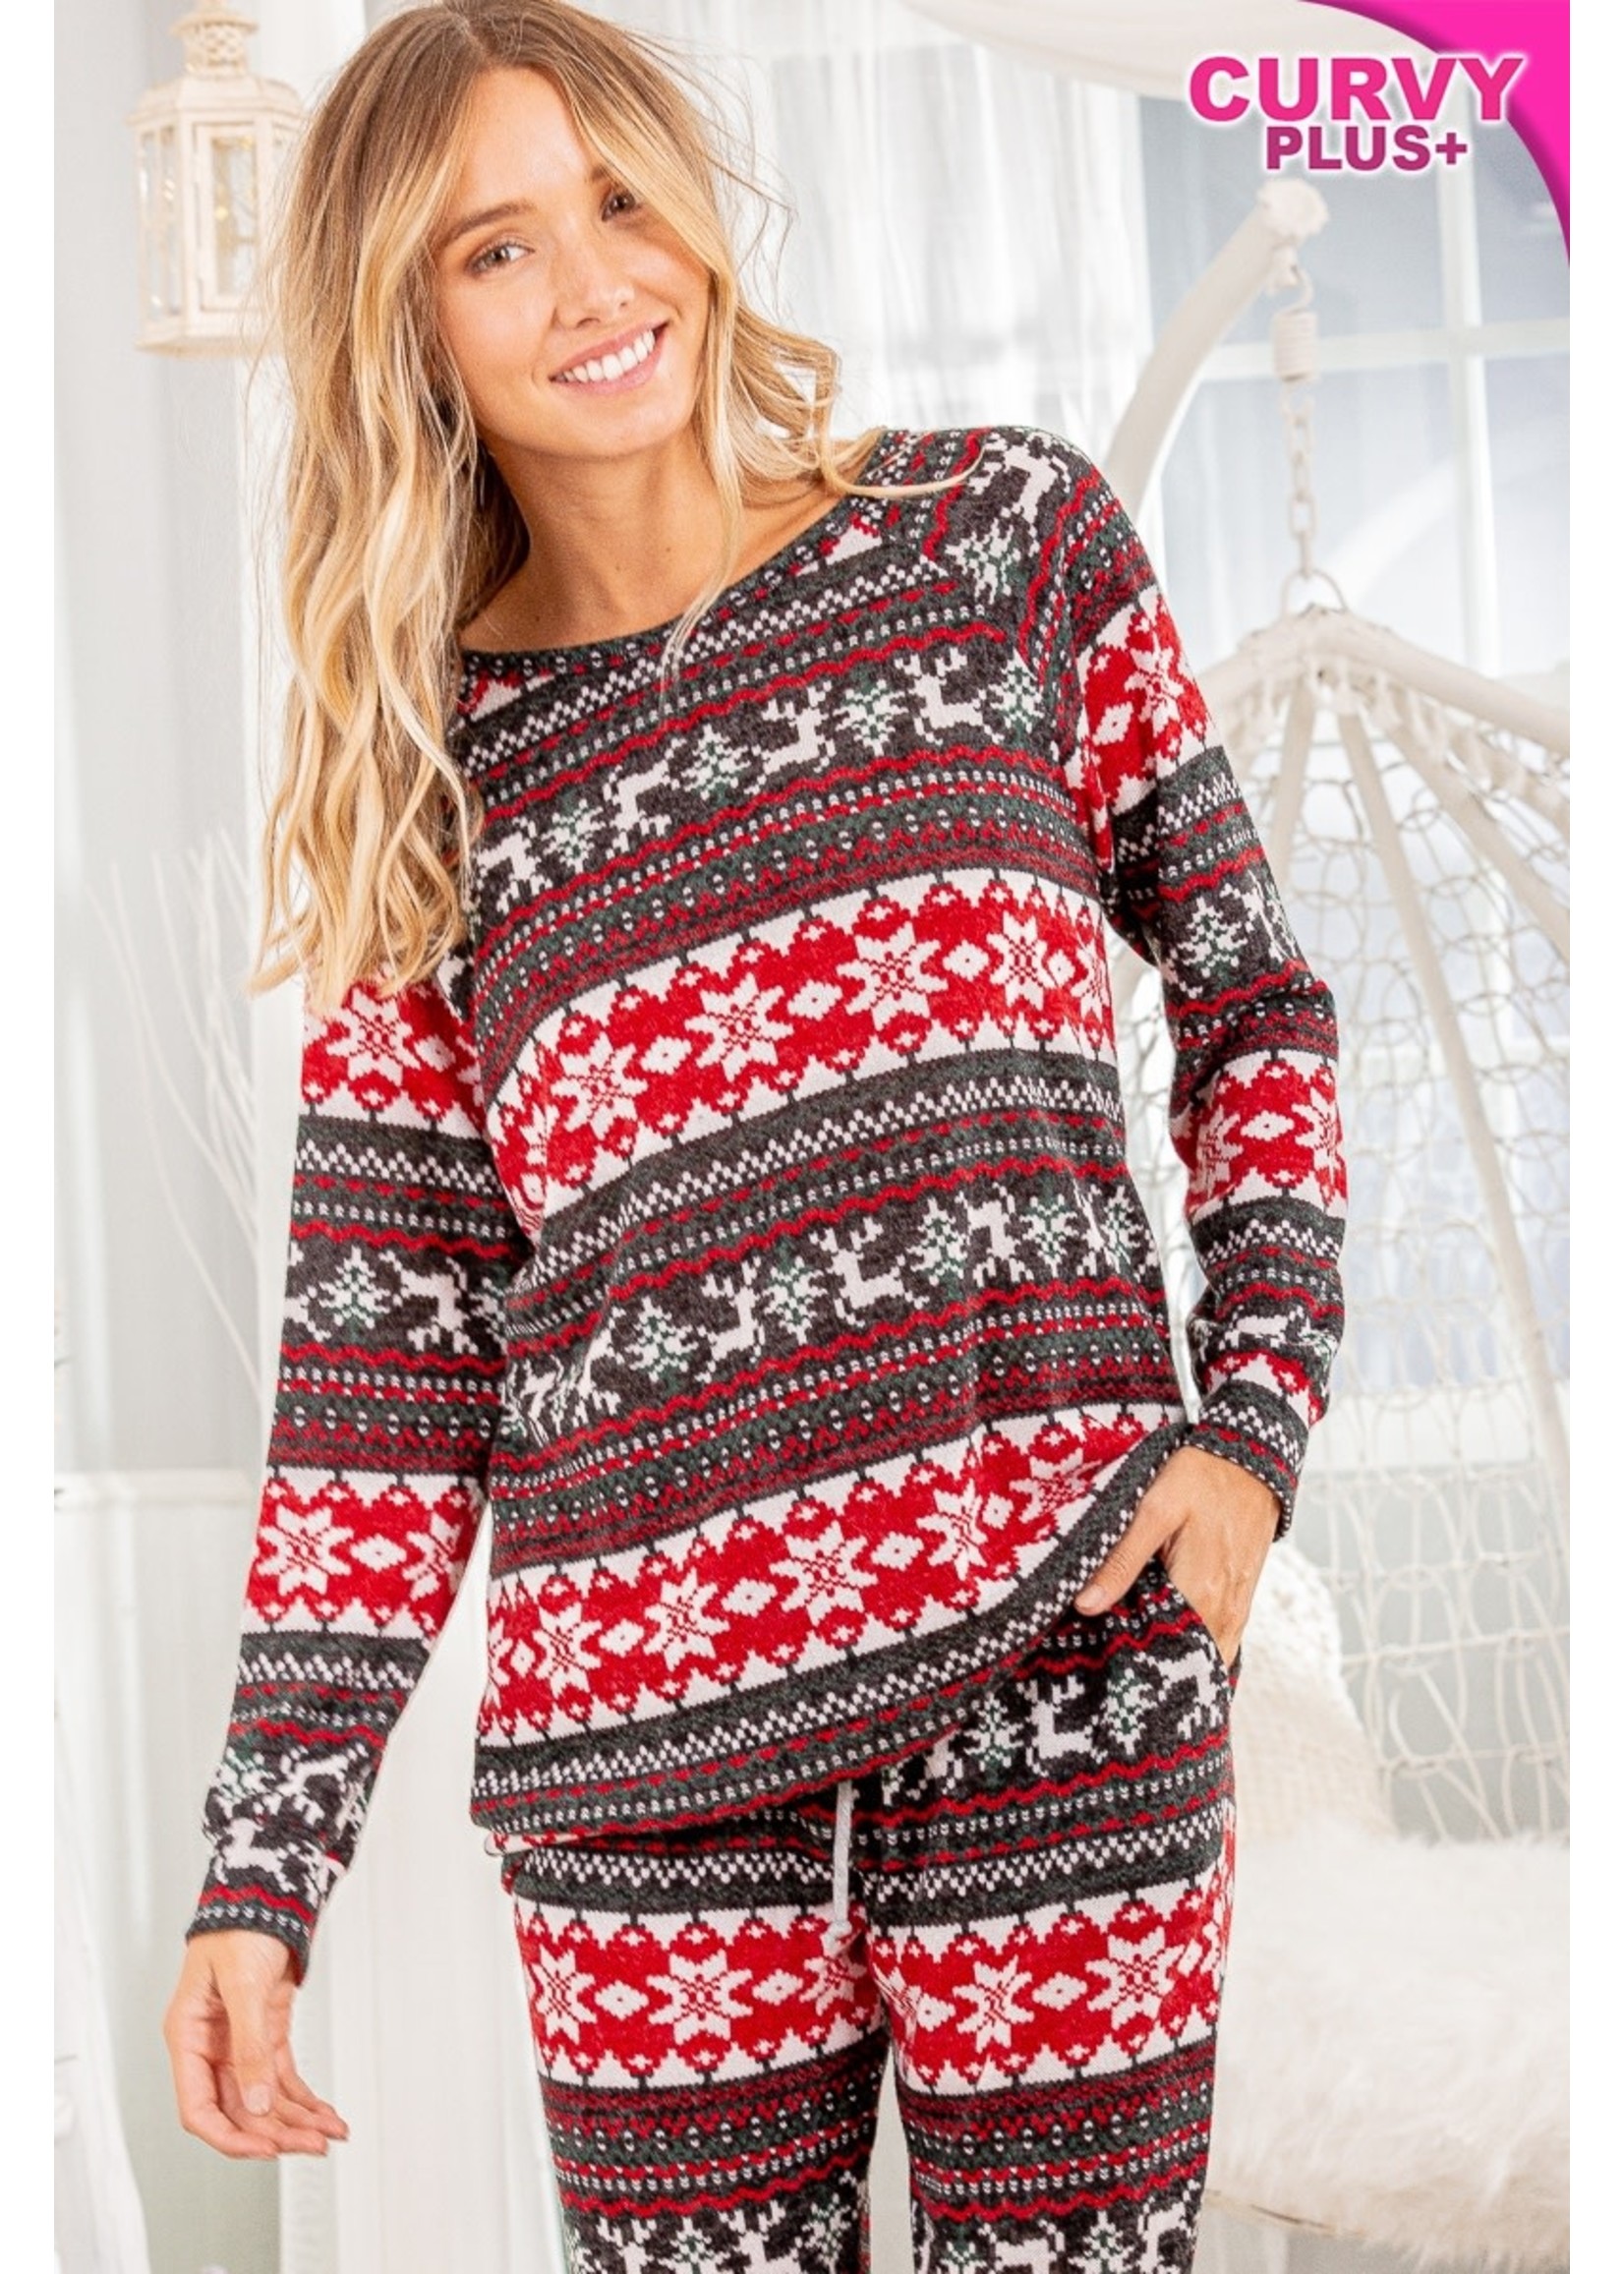 Heimish Xmas Reindeer Top w/ Band at Bottom - RED/BLK